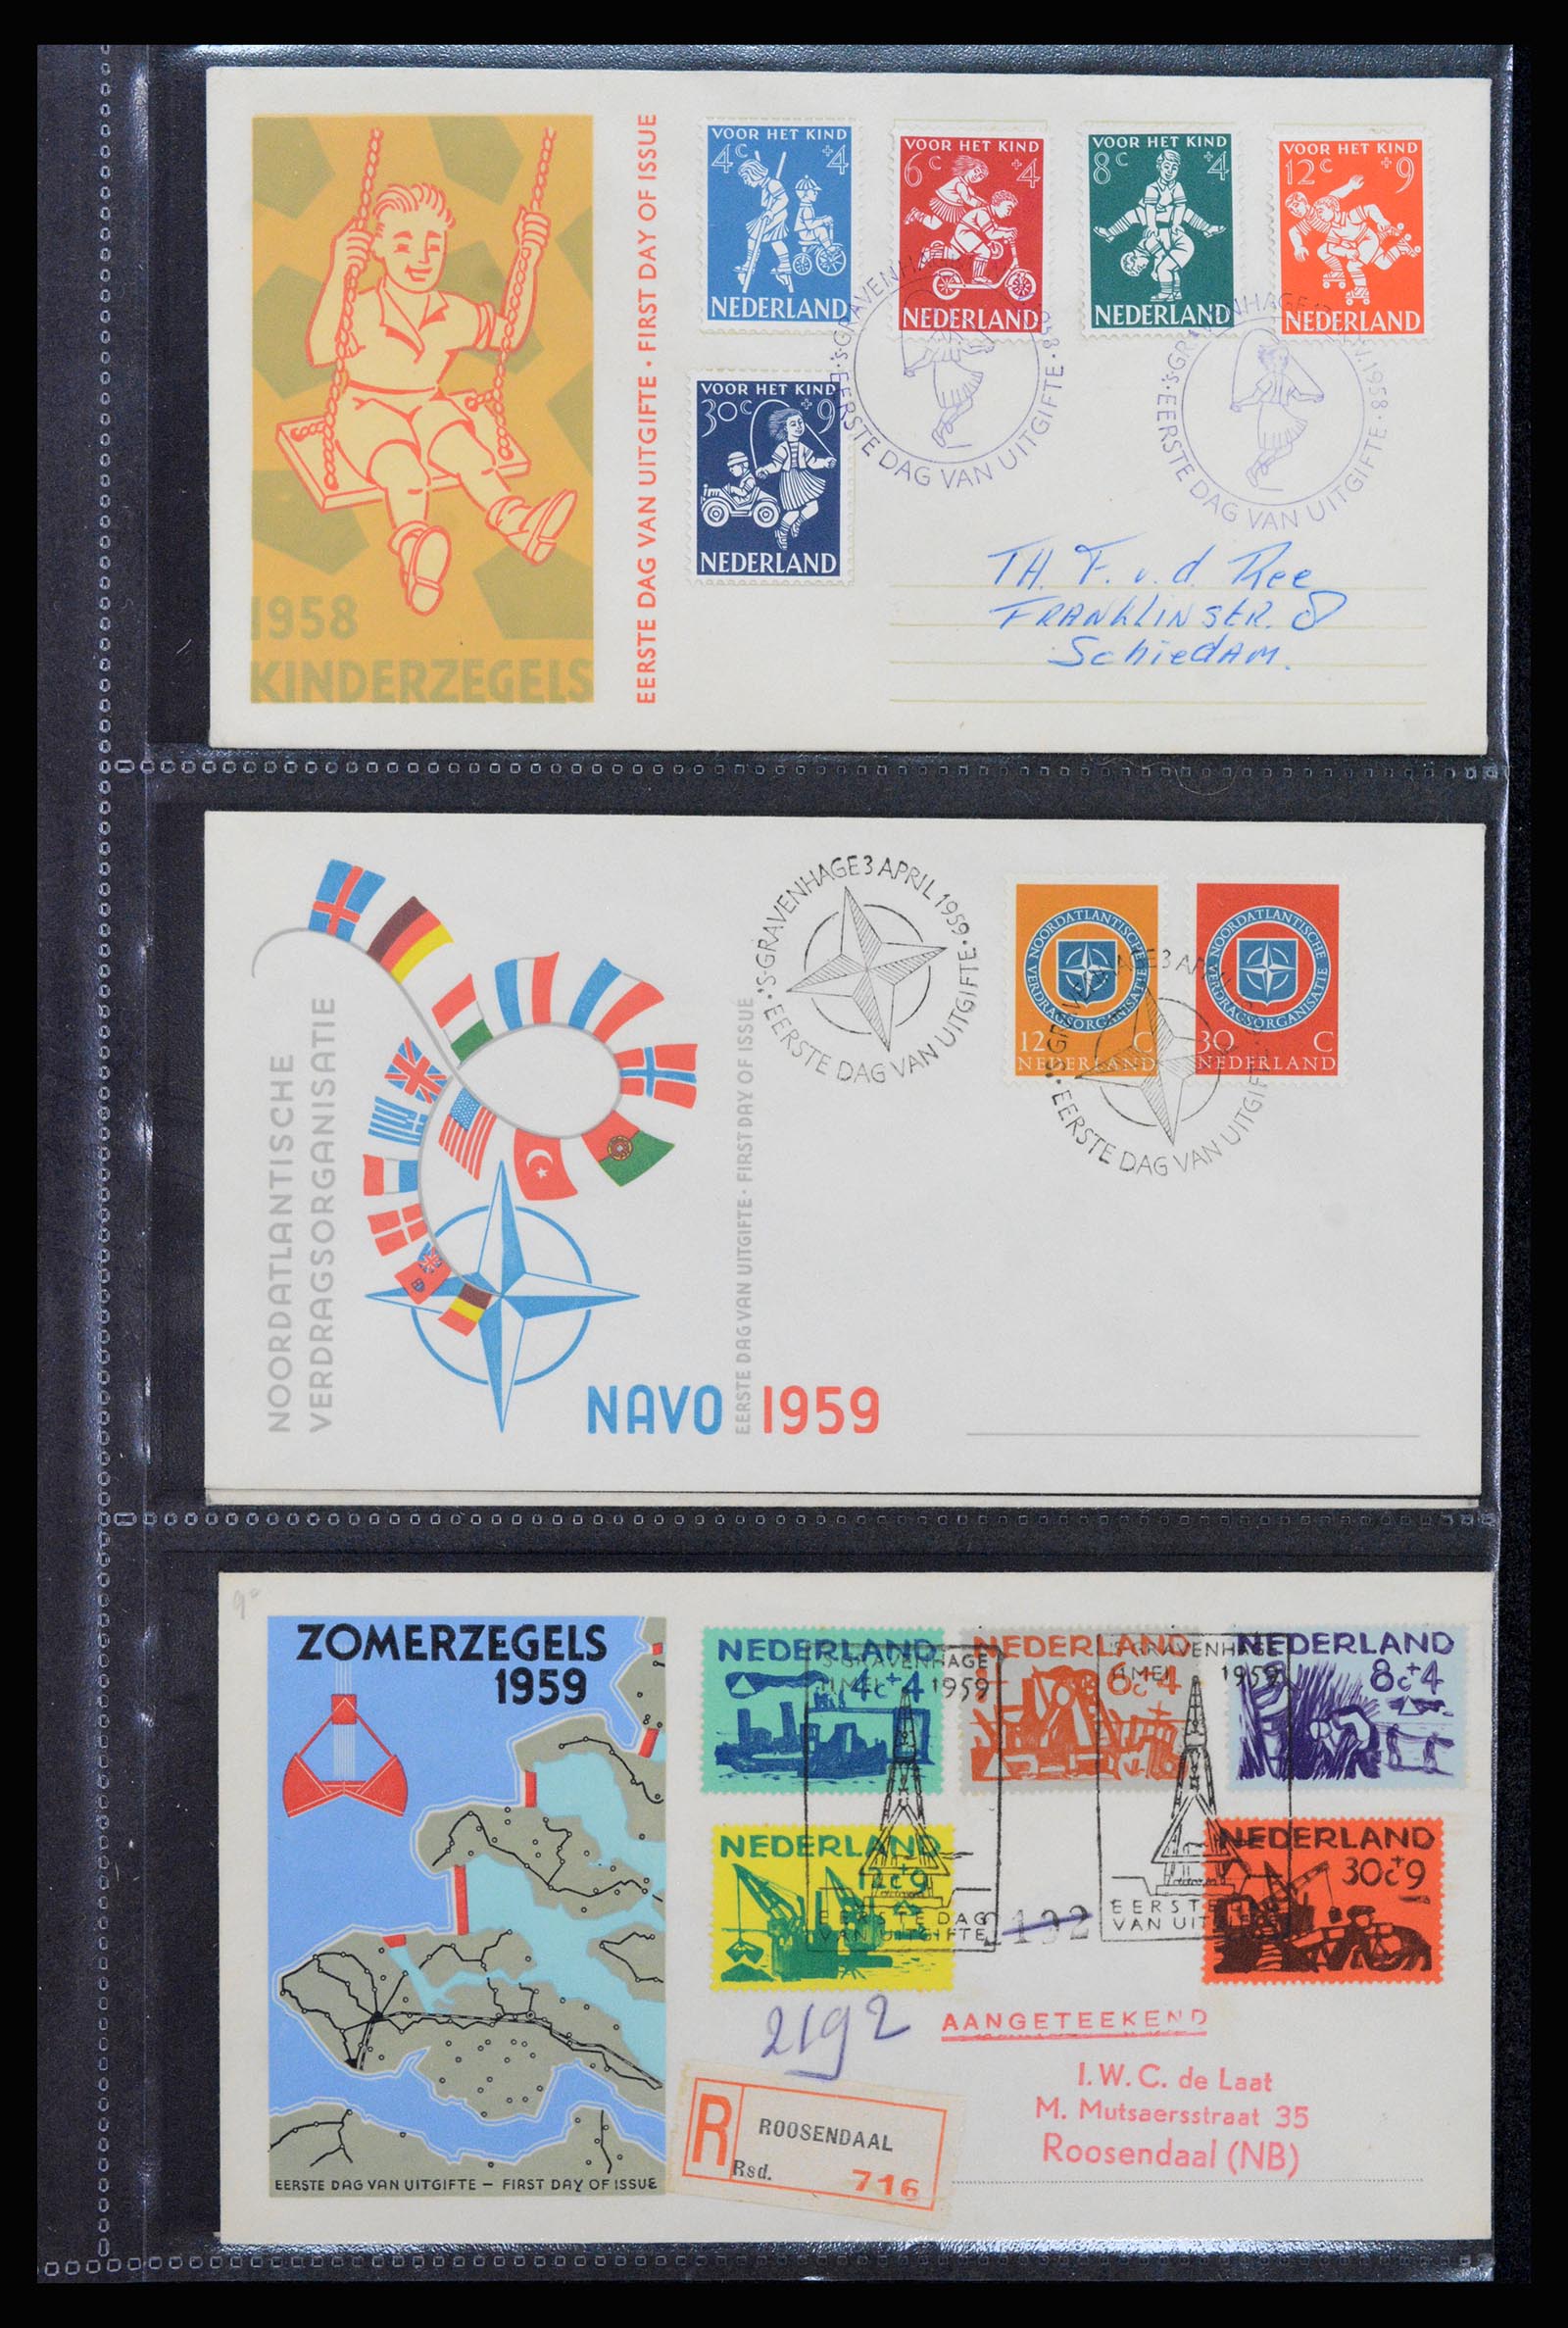 37264 013 - Stamp collection 37264 Netherlands FDC's 1950-1975.